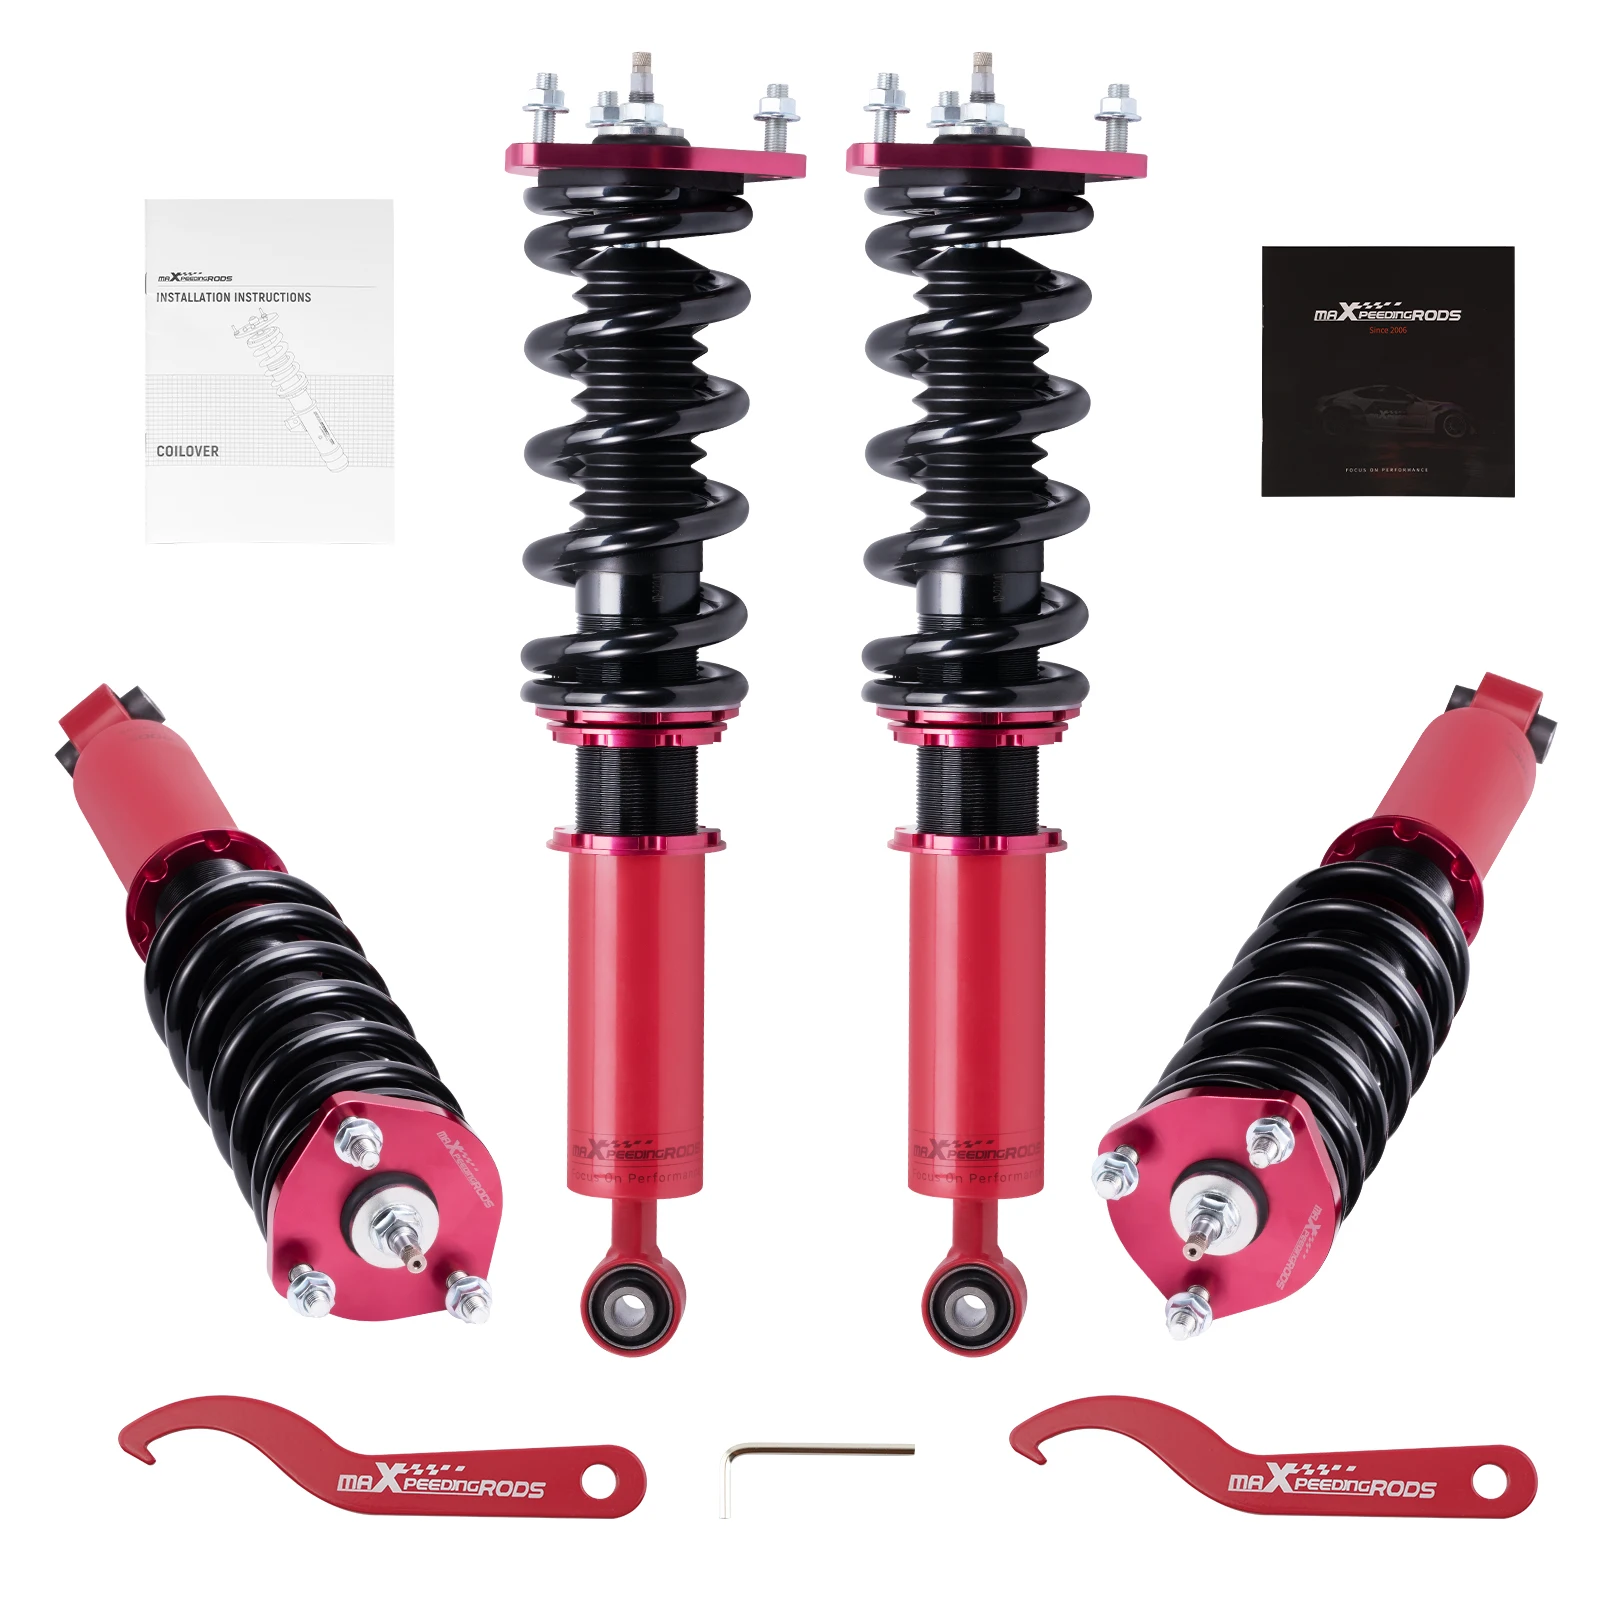 

Full Adjustable Coilover Damper 12/10KG Lowering Kit For Lexus GS300 GS430 98-05 Coilovers Coils Lowering